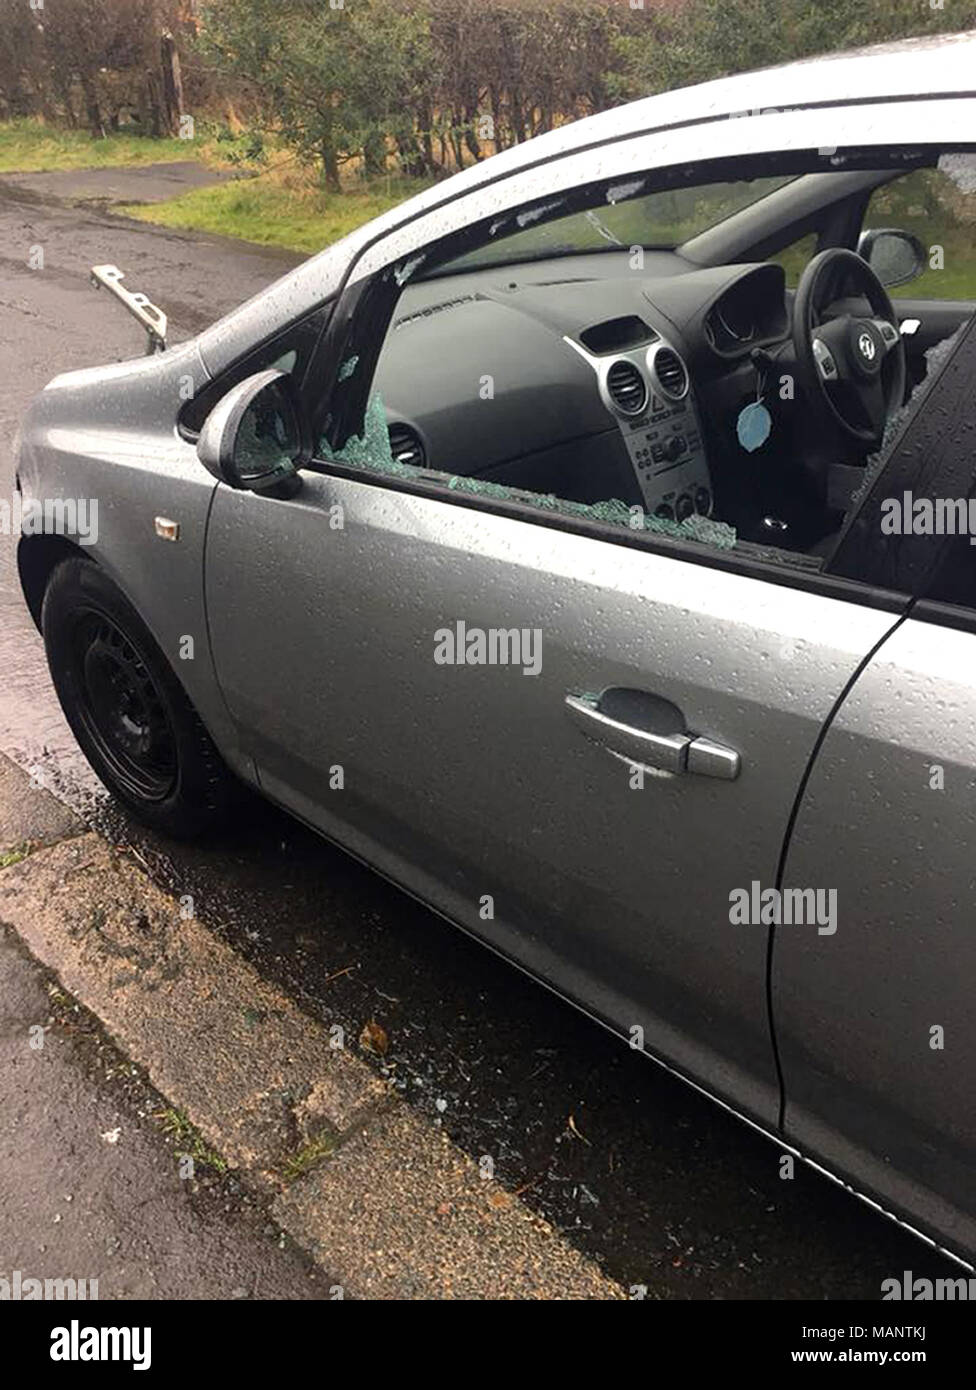 This Vauxhall Corsa had its bonnet, grille and lights stolen overnight between Good Friday and Easter Saturday whilst parked outside its owner's house in Chester-le-Street, County Durham. The vehicle is the latest example of the so-called Corsa Cannibals phenomenon where criminals strip entire parts from the popular hatchback's bodywork. Stock Photo